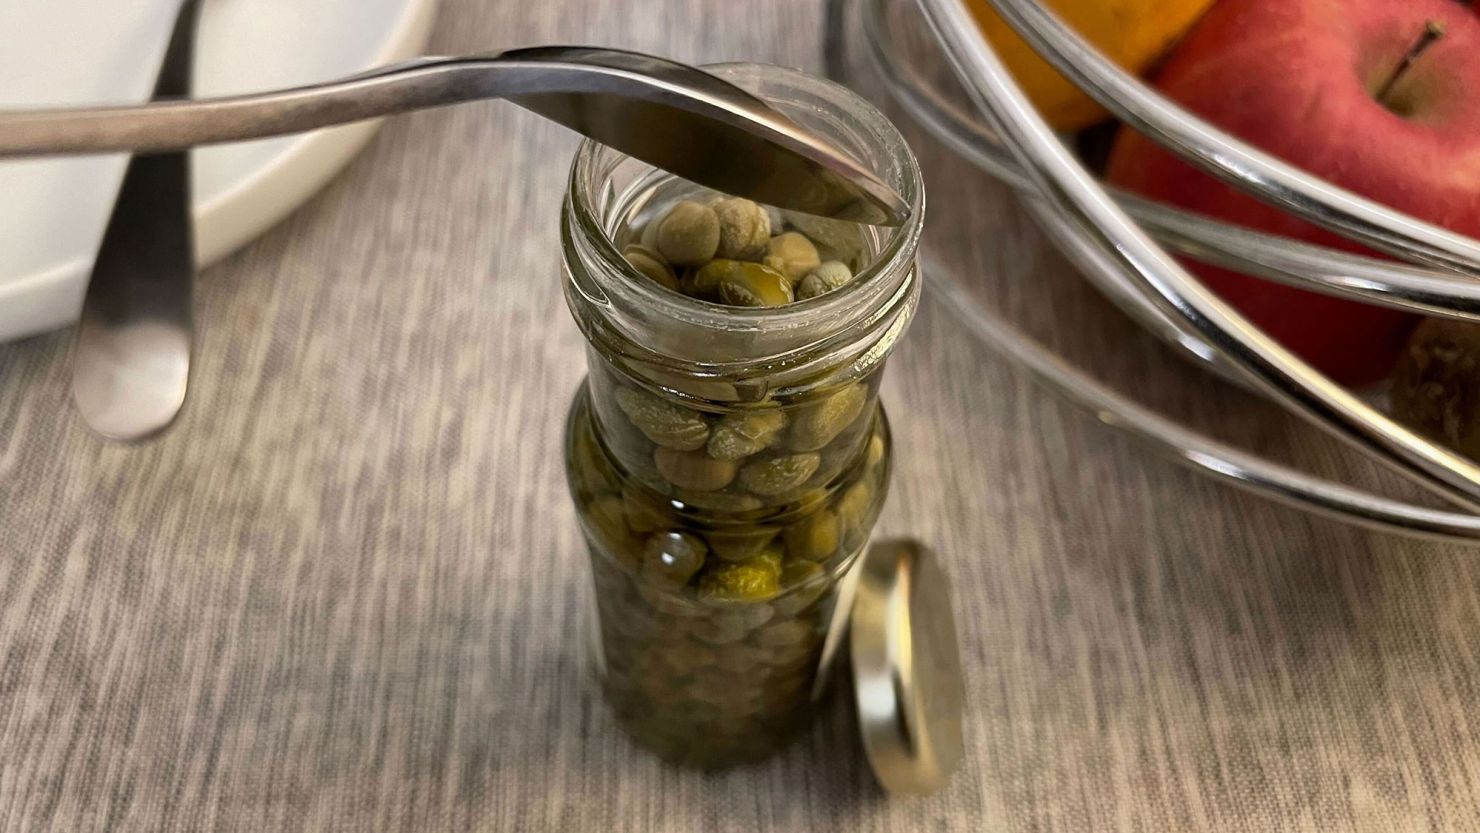 This common 2-ounce jar of capers is frustratingly skinny.